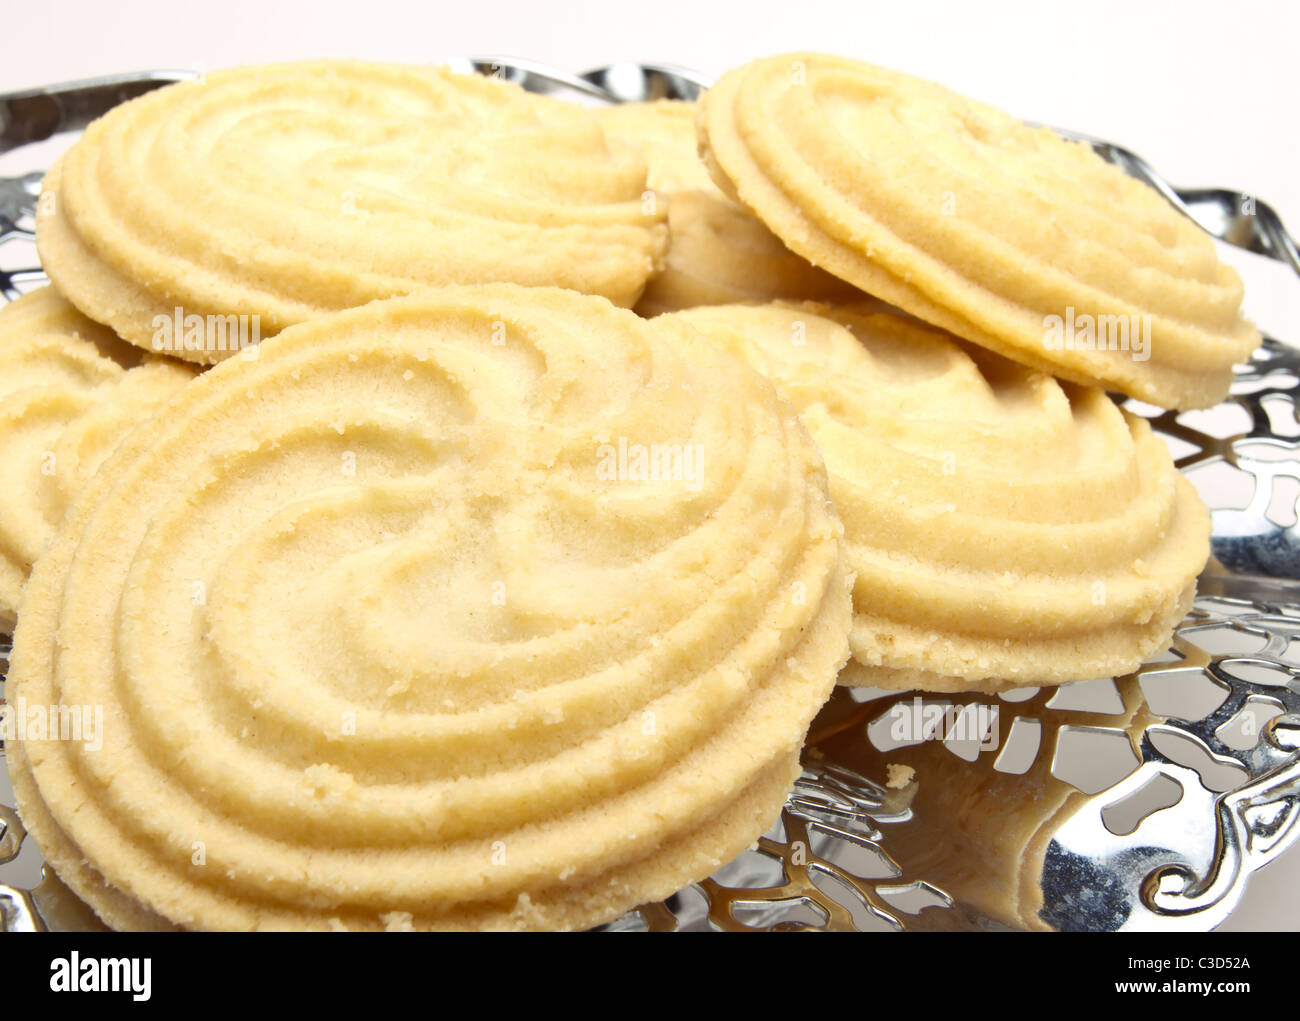 Close up of Viennese Swirl Biscuits on silver metal cake stand. Stock Photo